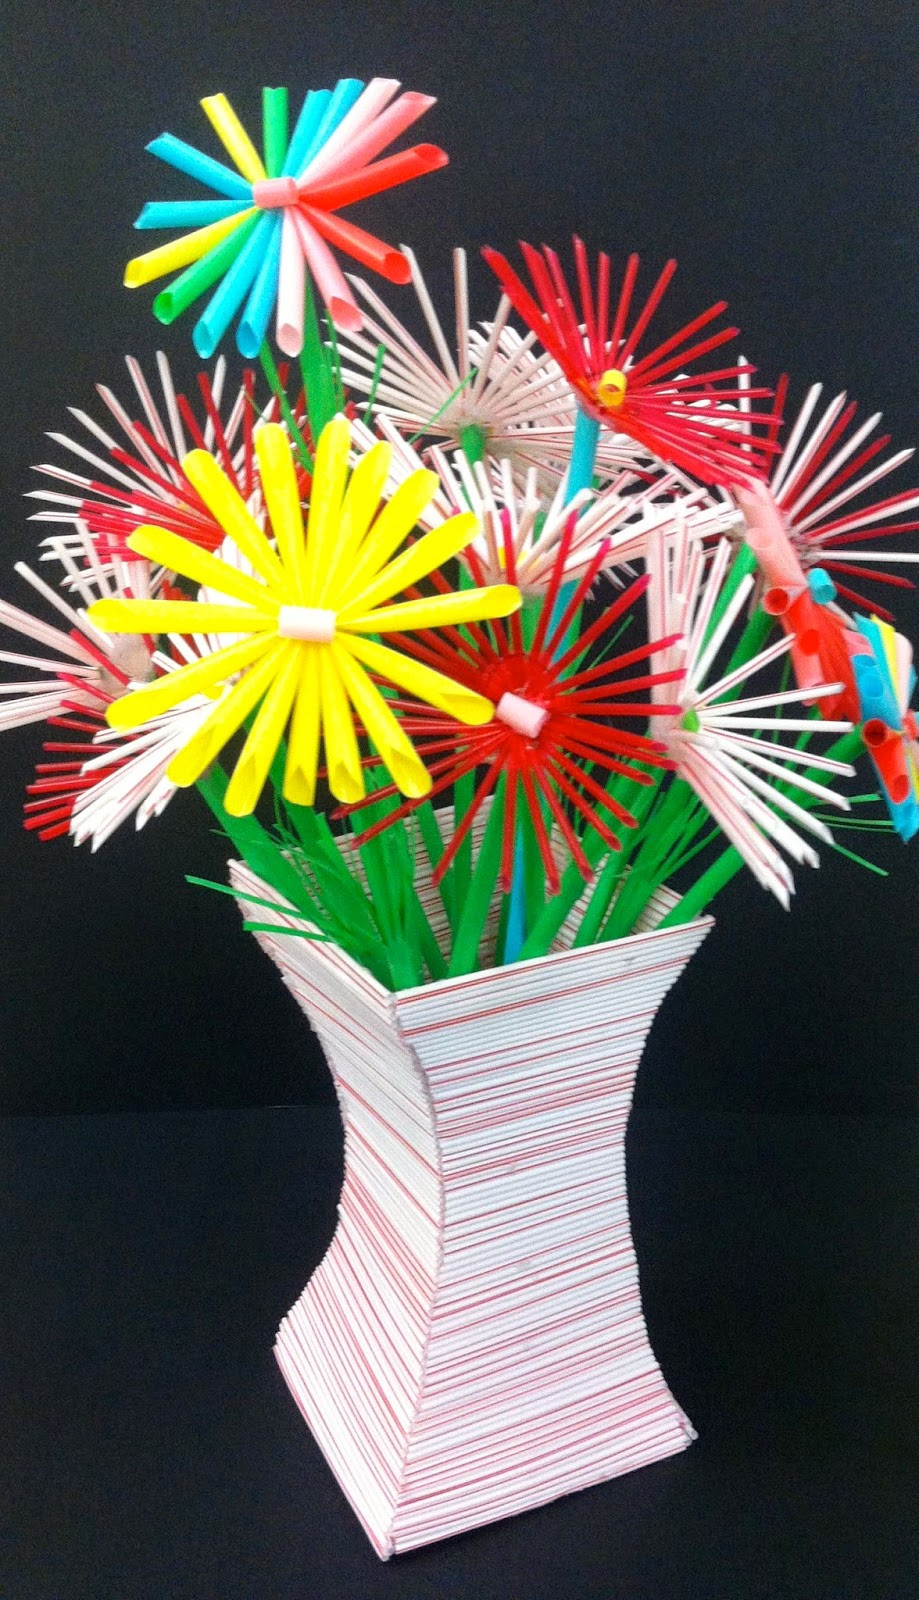 Art N Crafts For Toddlers
 Kids Art Market Mass Straw Sculpture with Francesca Pasquali